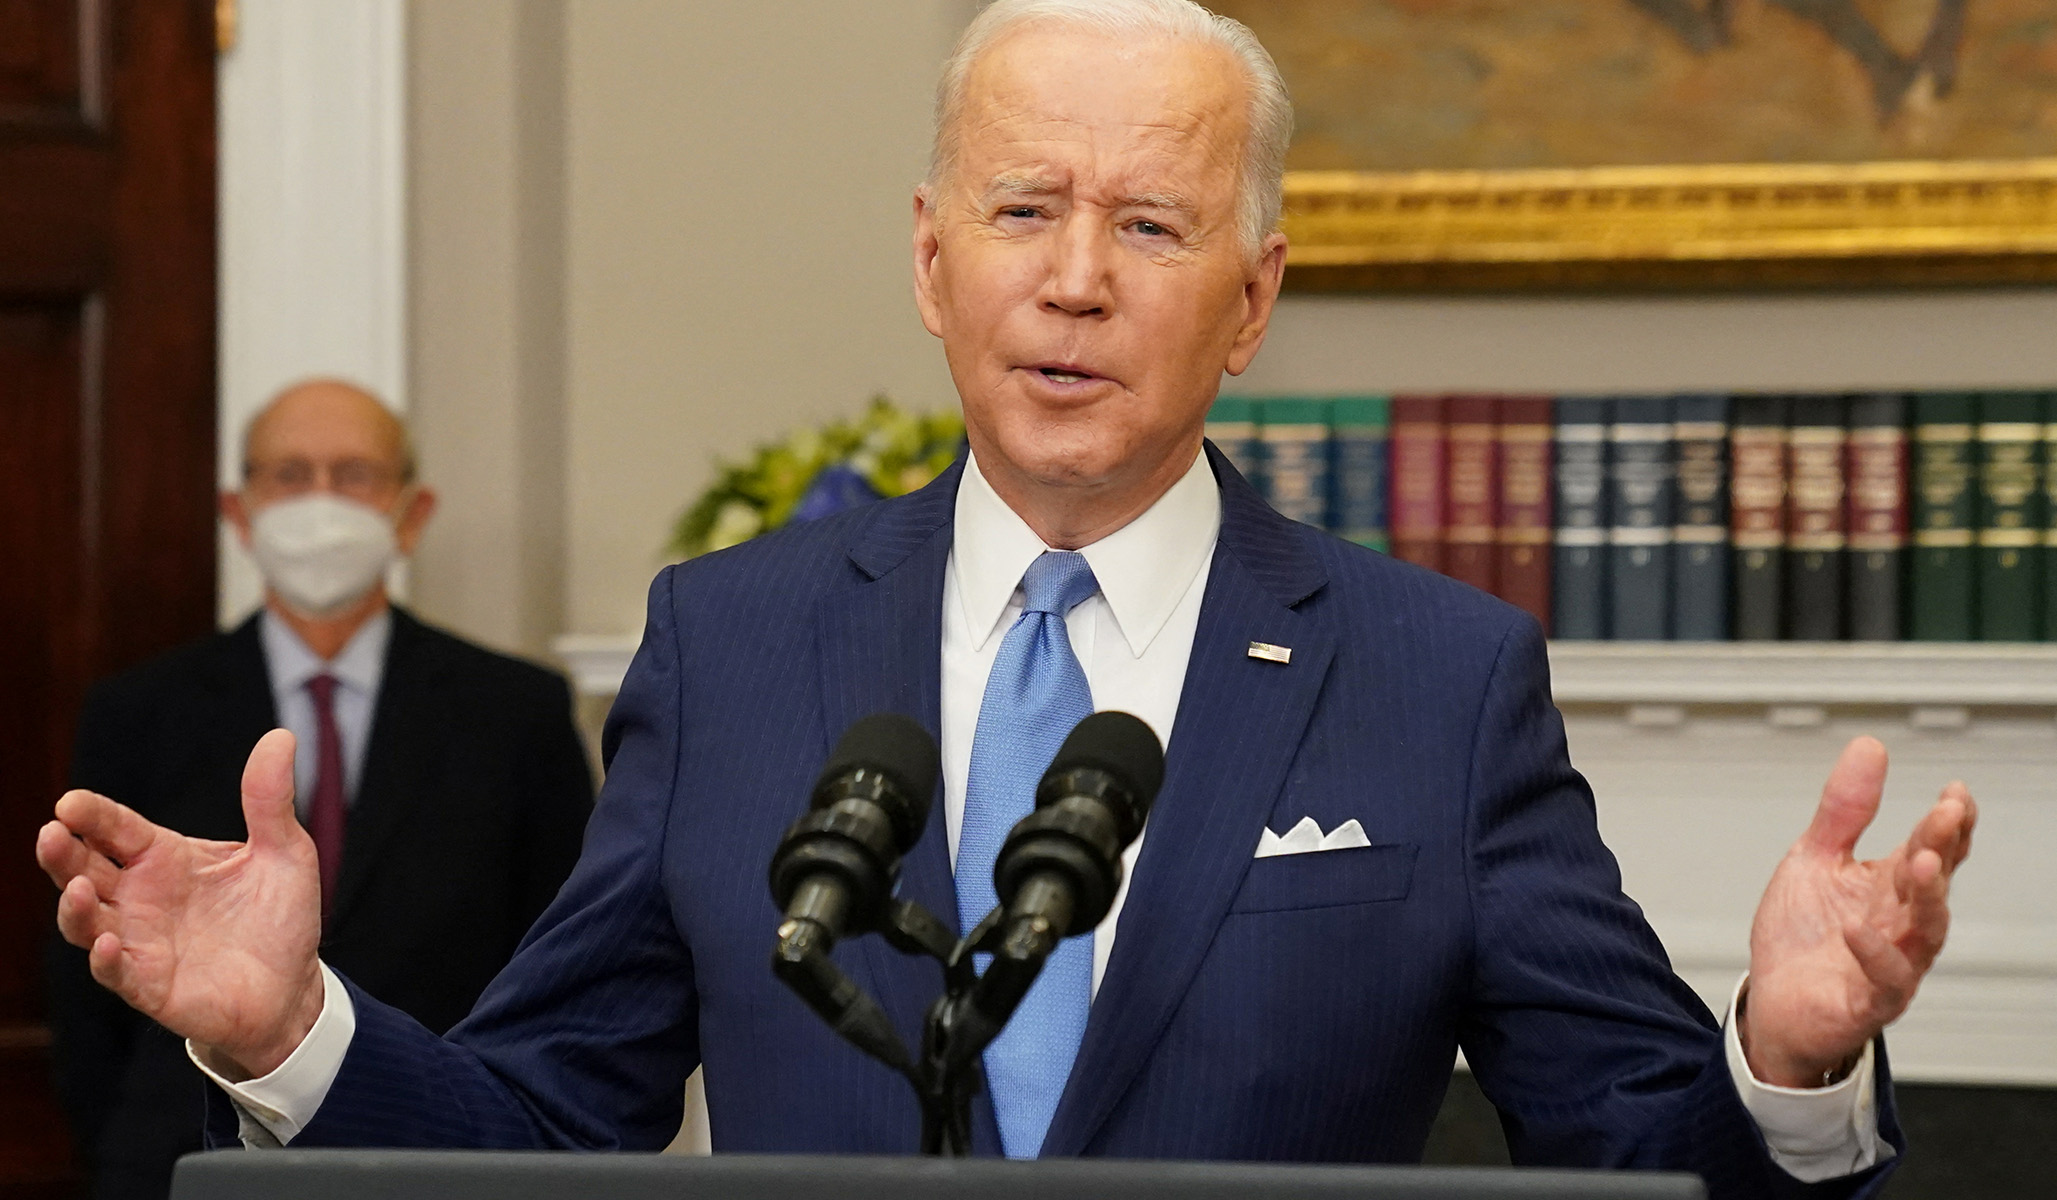 Biden Pledges to Nominate Black Woman to Supreme Court by End of February